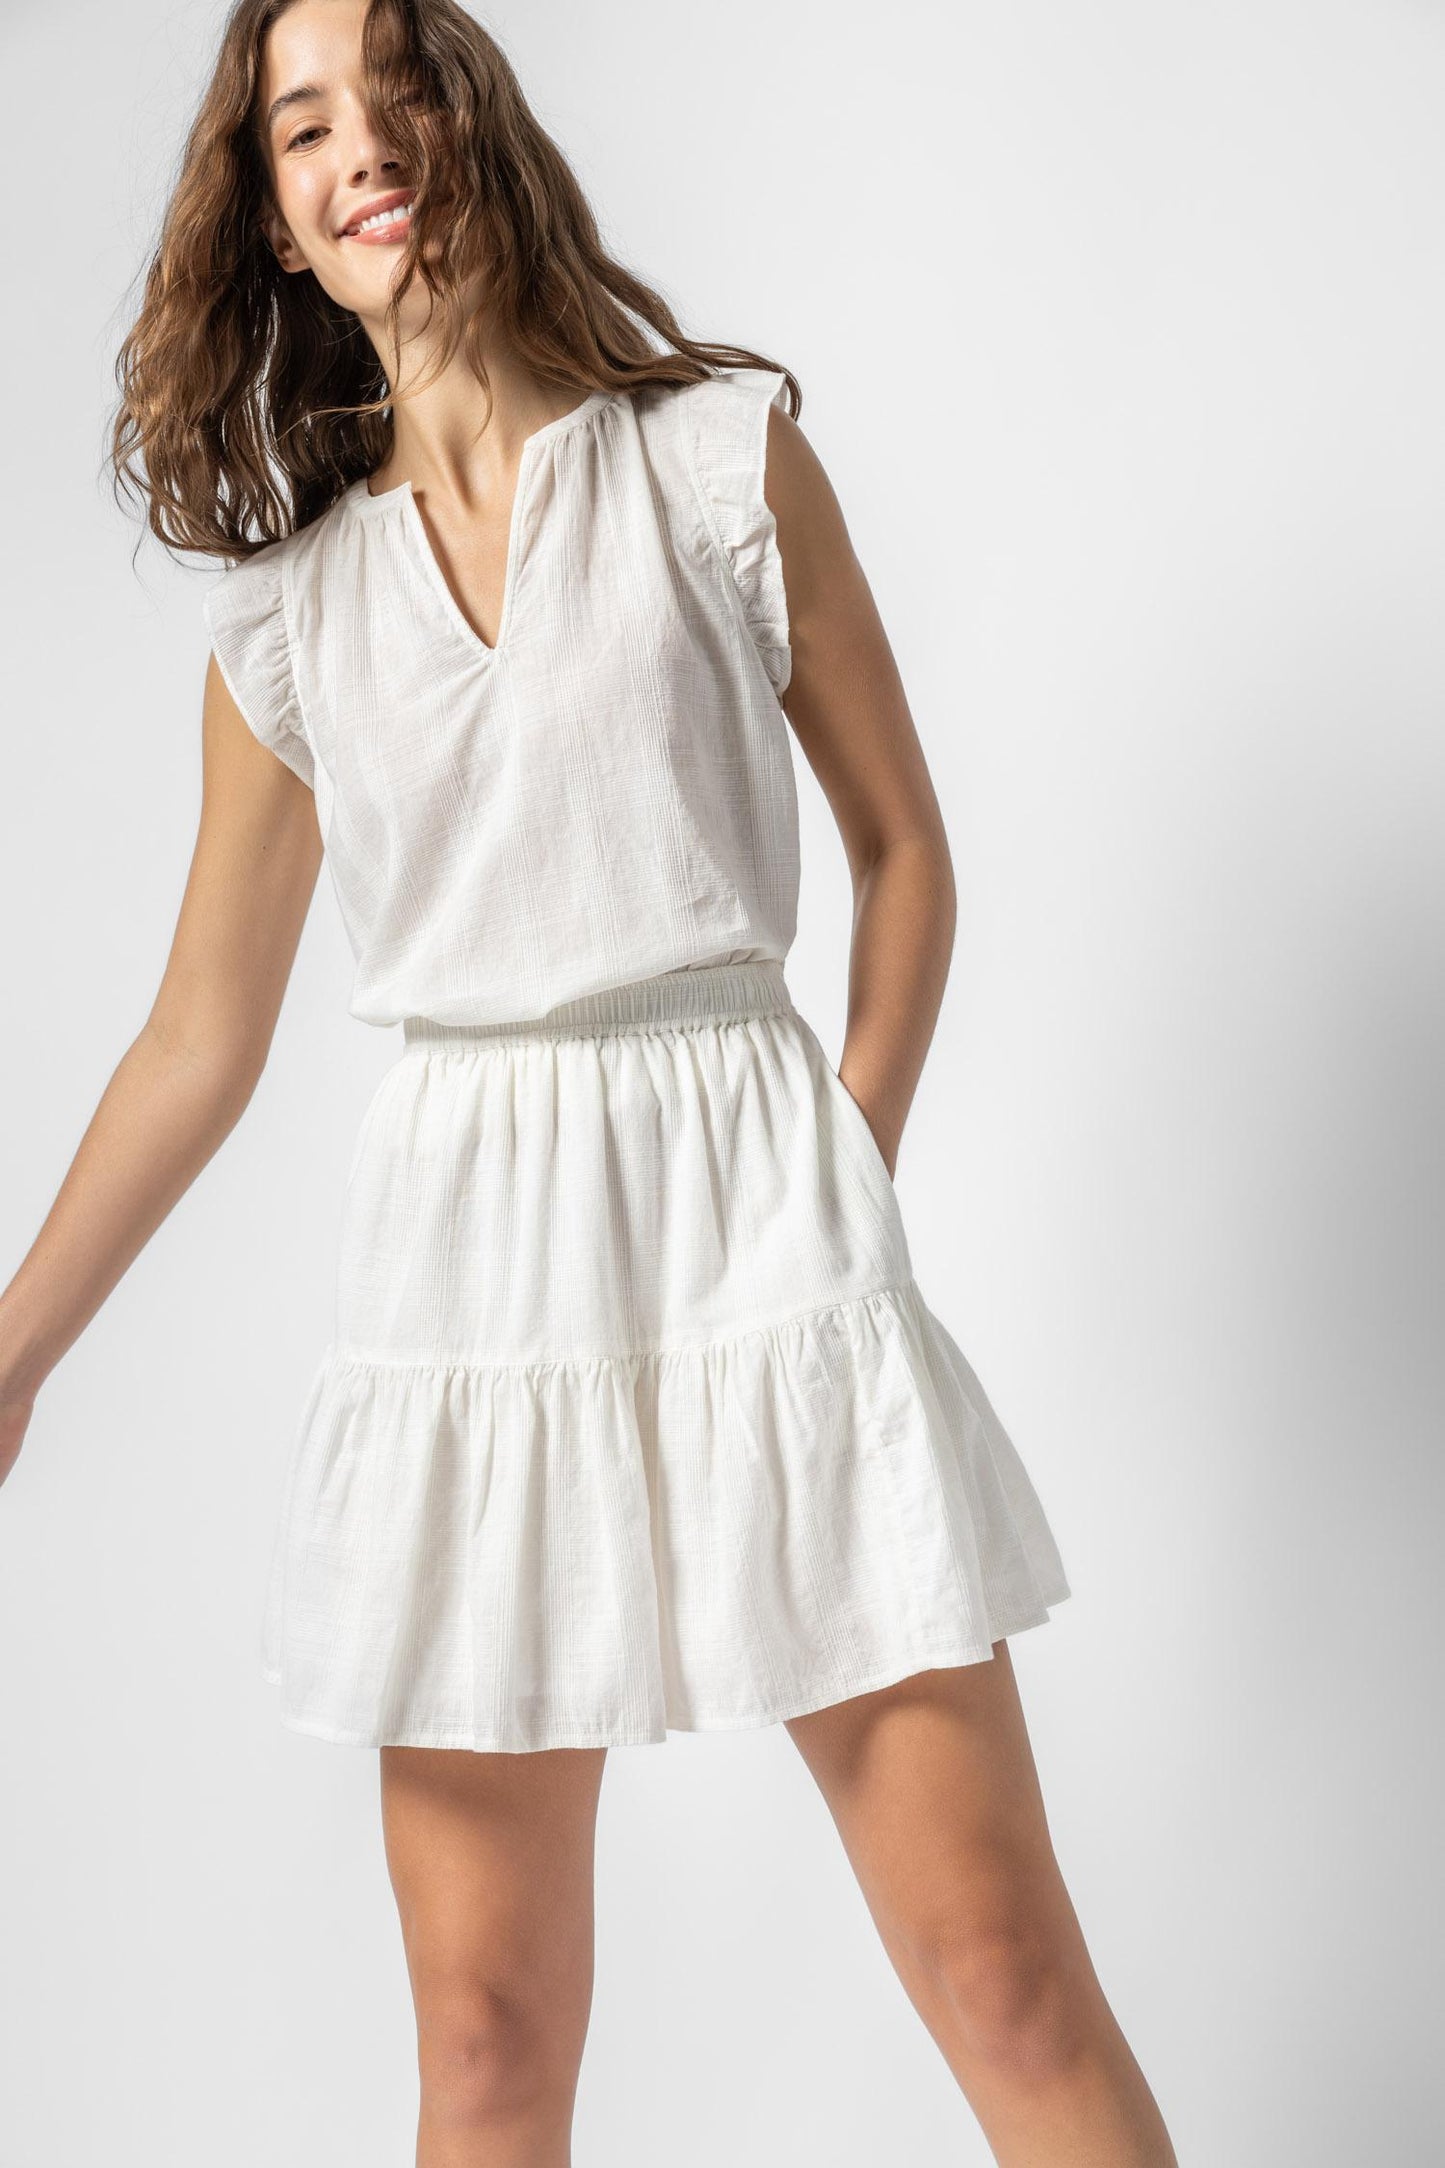 Tiered Short Skirt in white by Lilla P